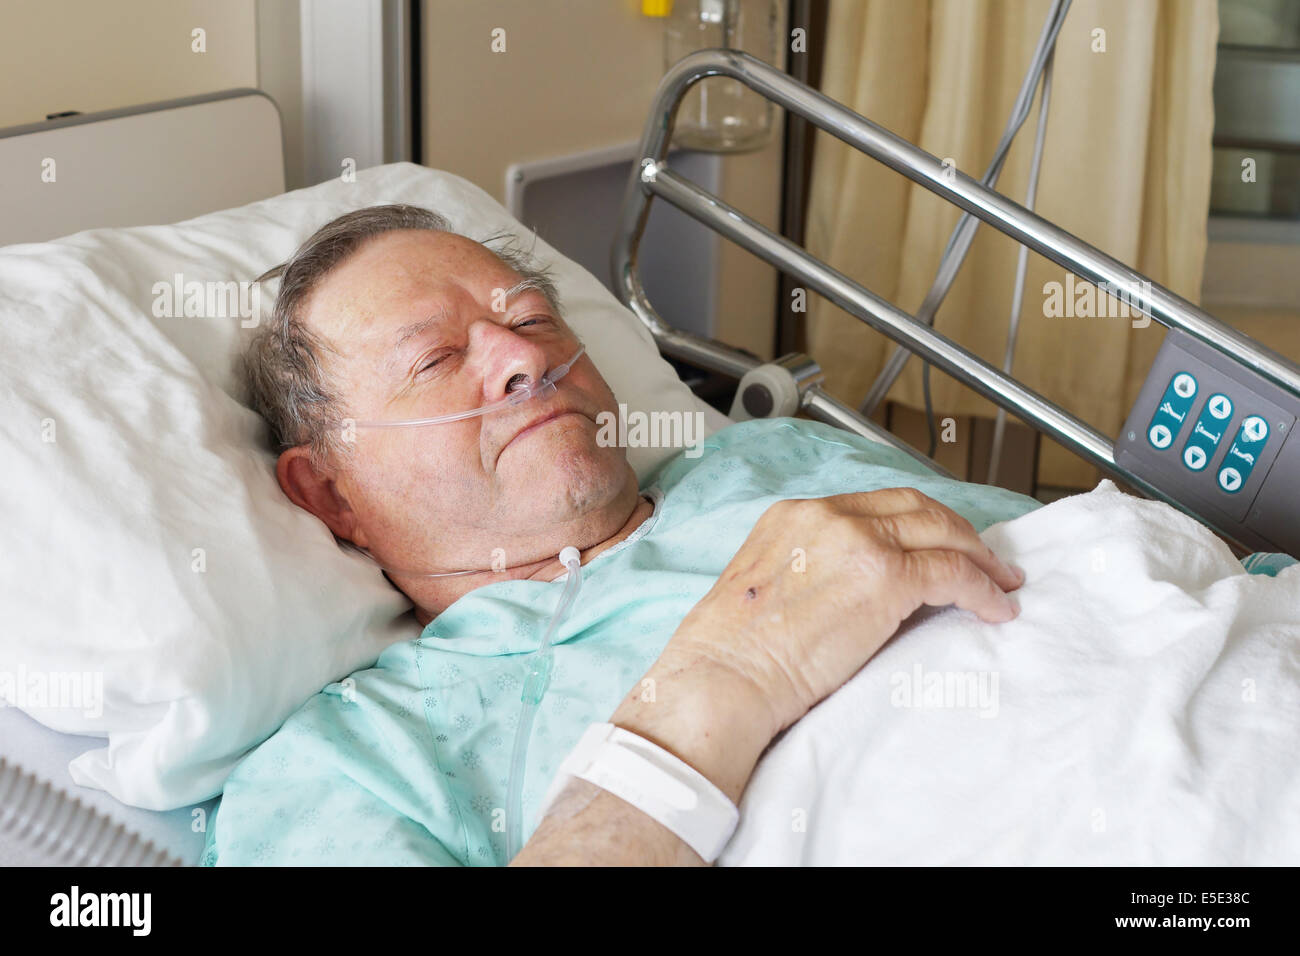 Portrait of sick old man in hospital bed Stock Photo